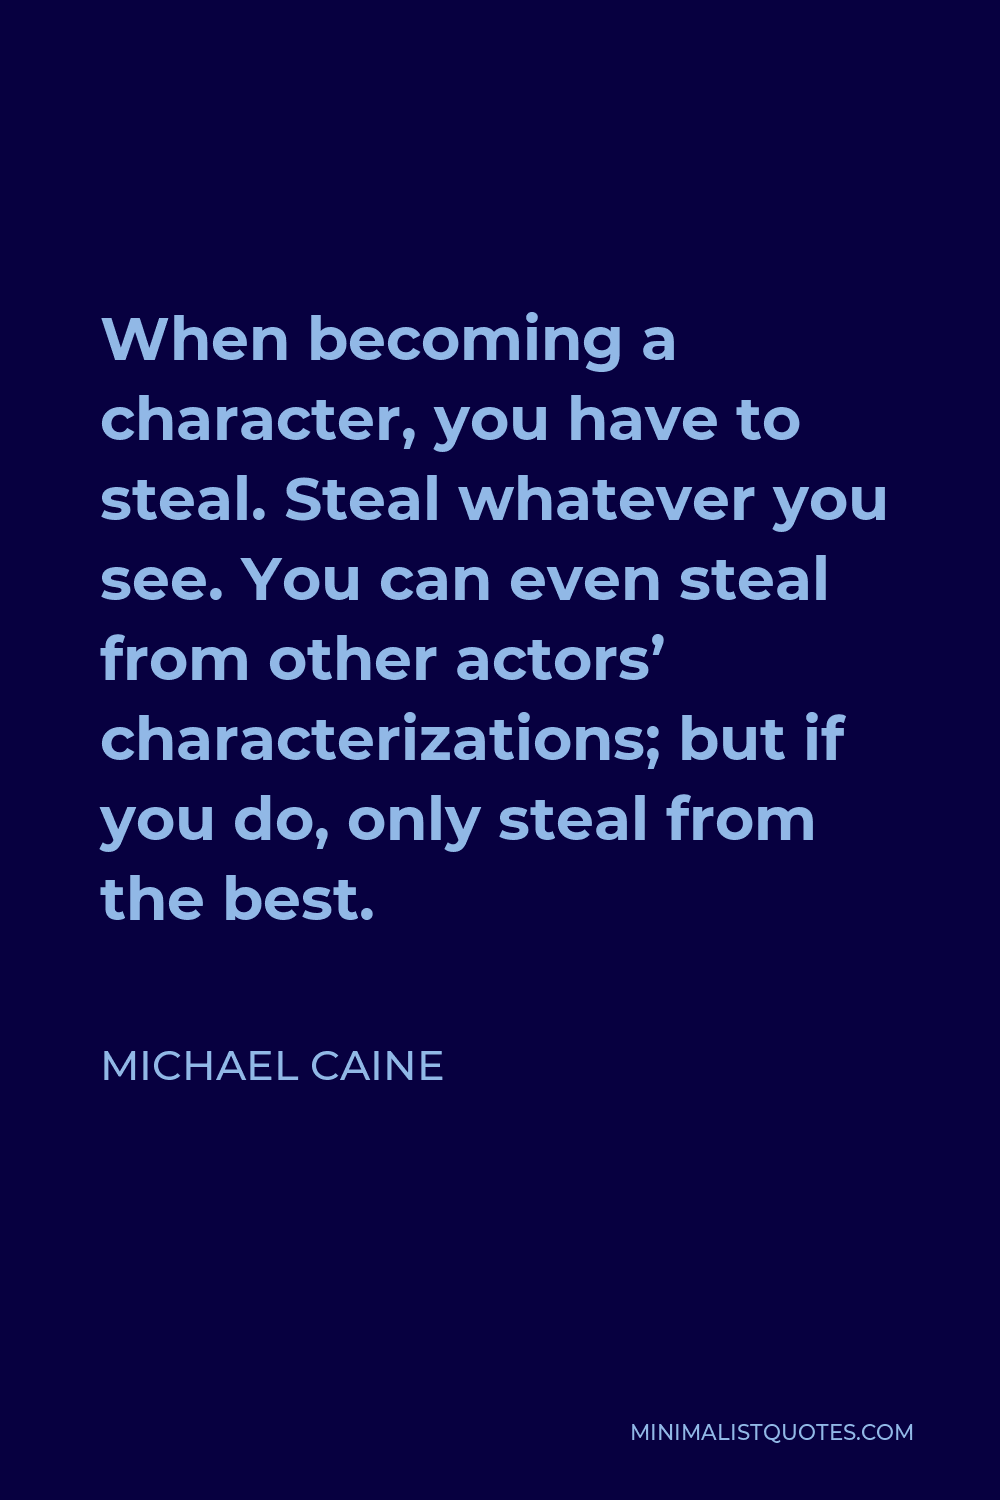 Michael Caine Quote - When becoming a character, you have to steal. Steal whatever you see. You can even steal from other actors’ characterizations; but if you do, only steal from the best.